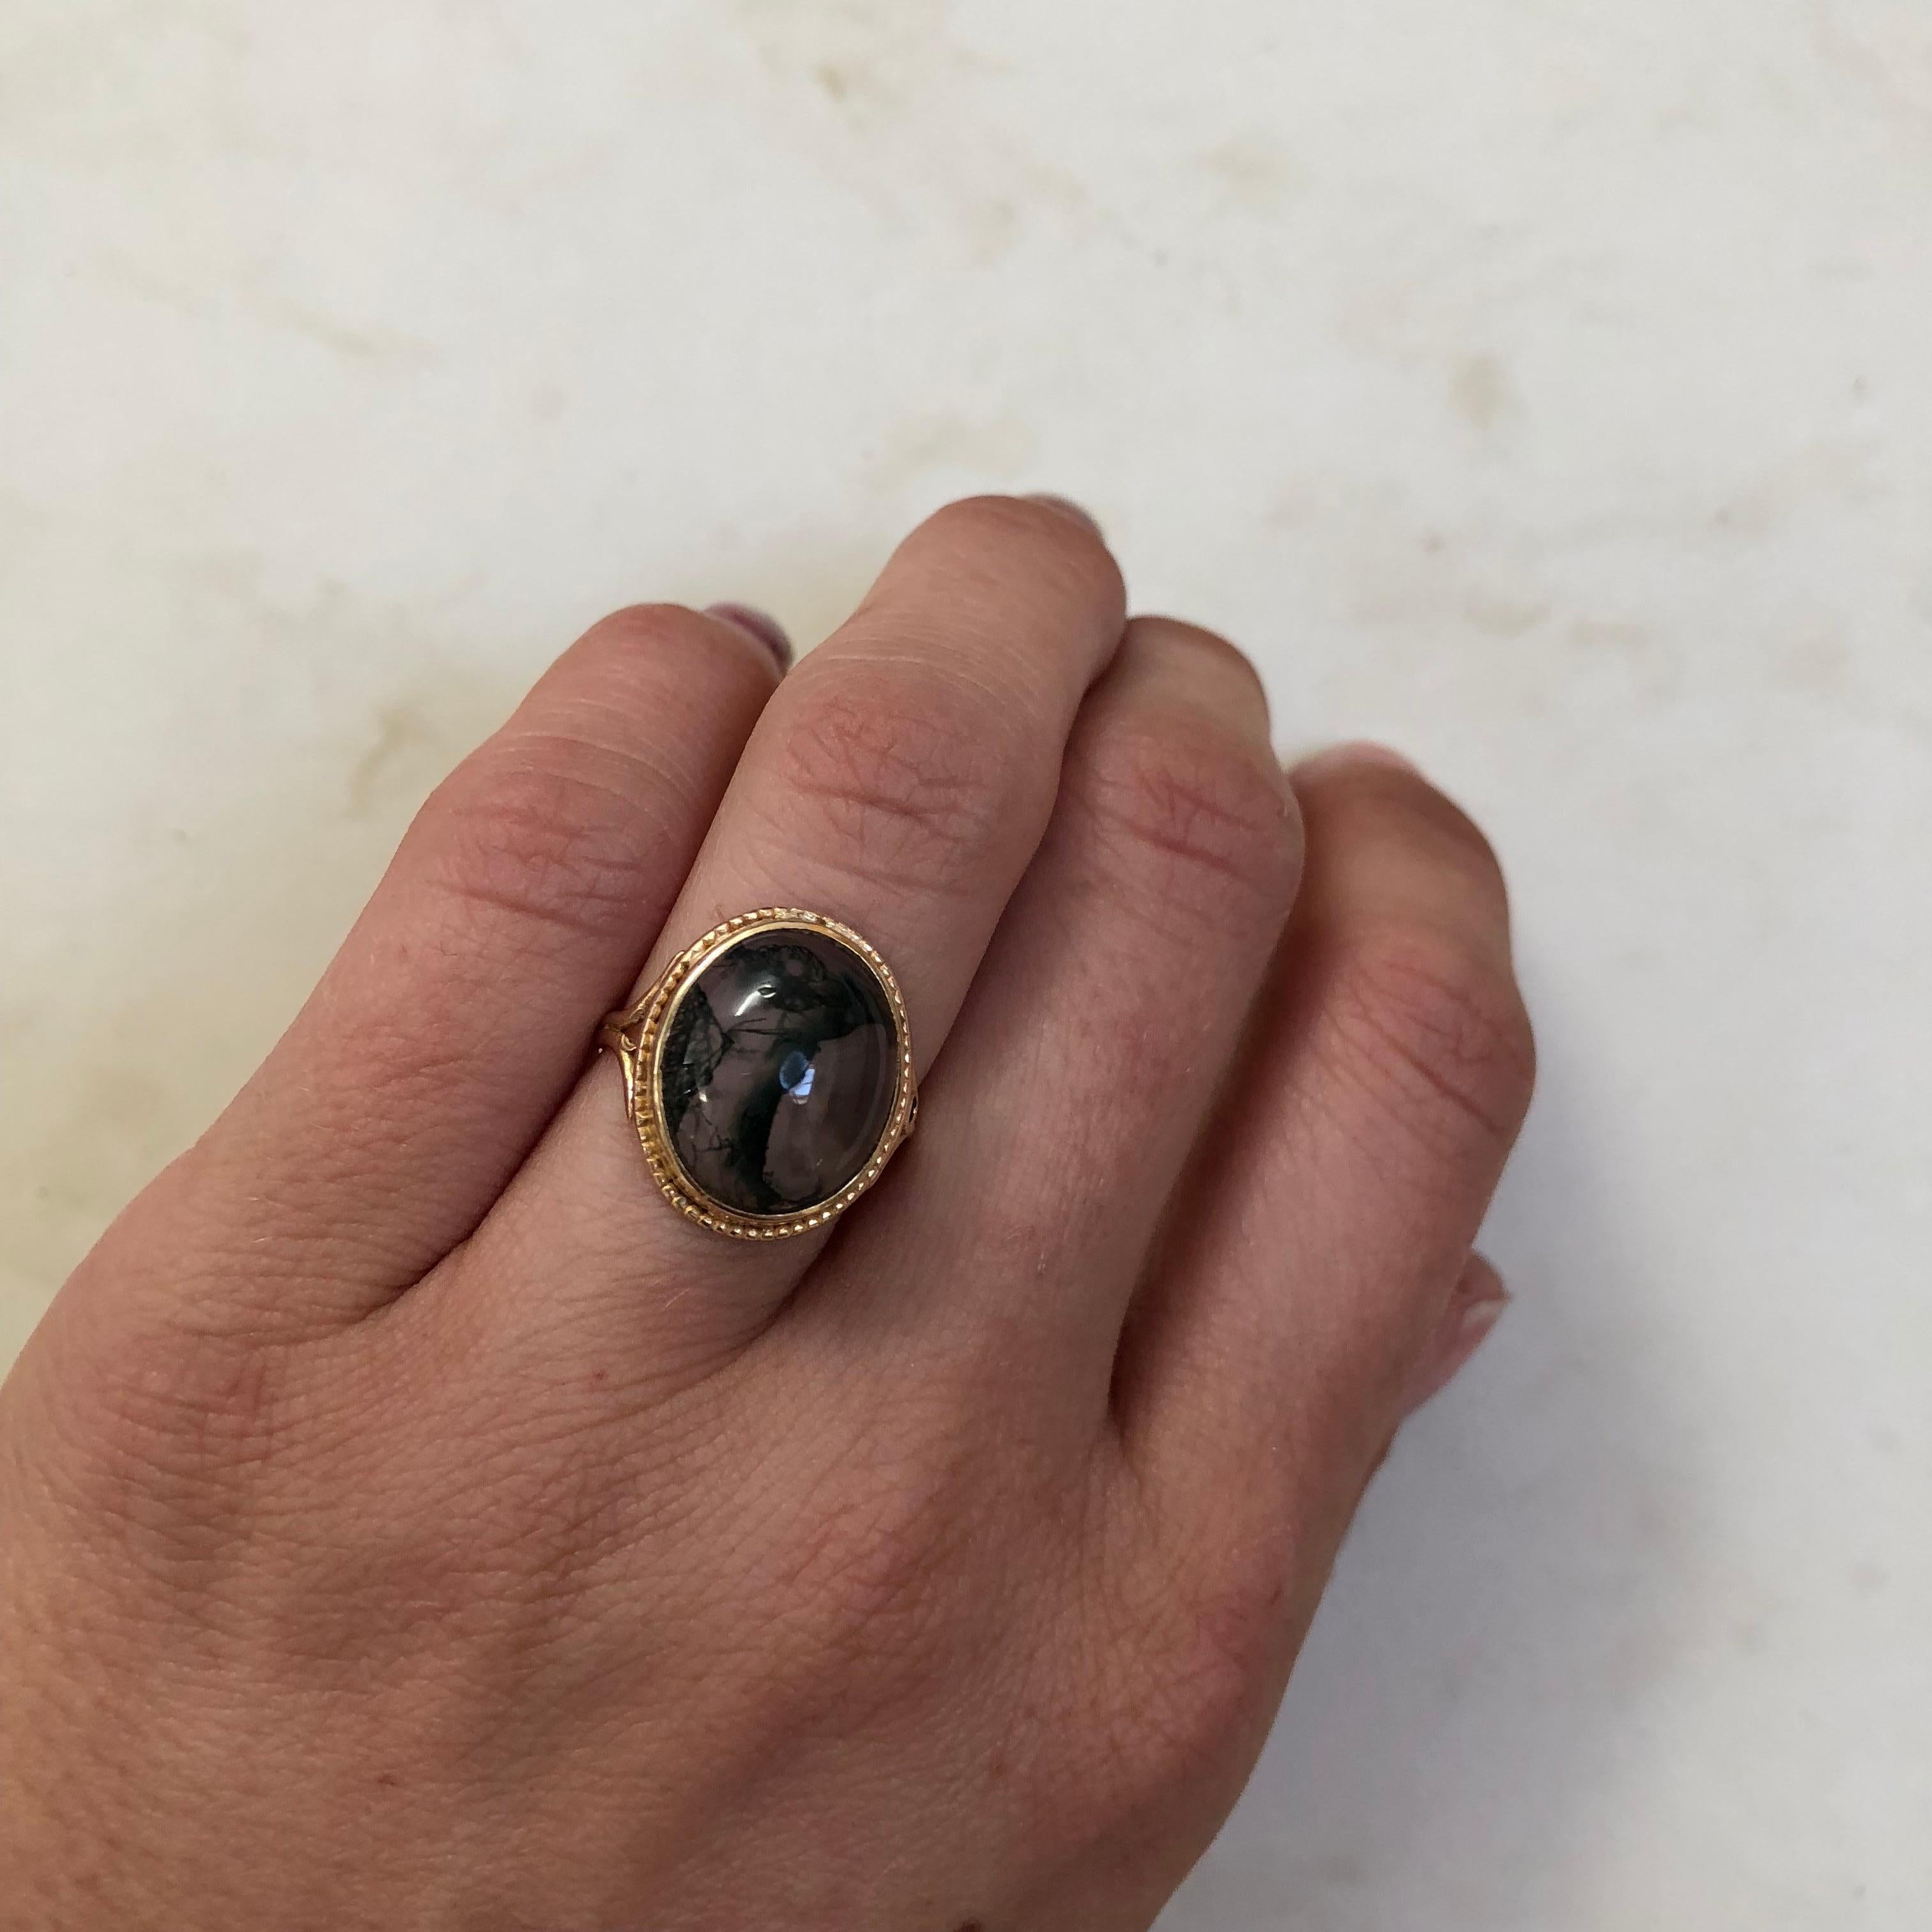 Vintage 9 Carat Gold Moss Agate Cabochon Ring In Excellent Condition For Sale In Chipping Campden, GB